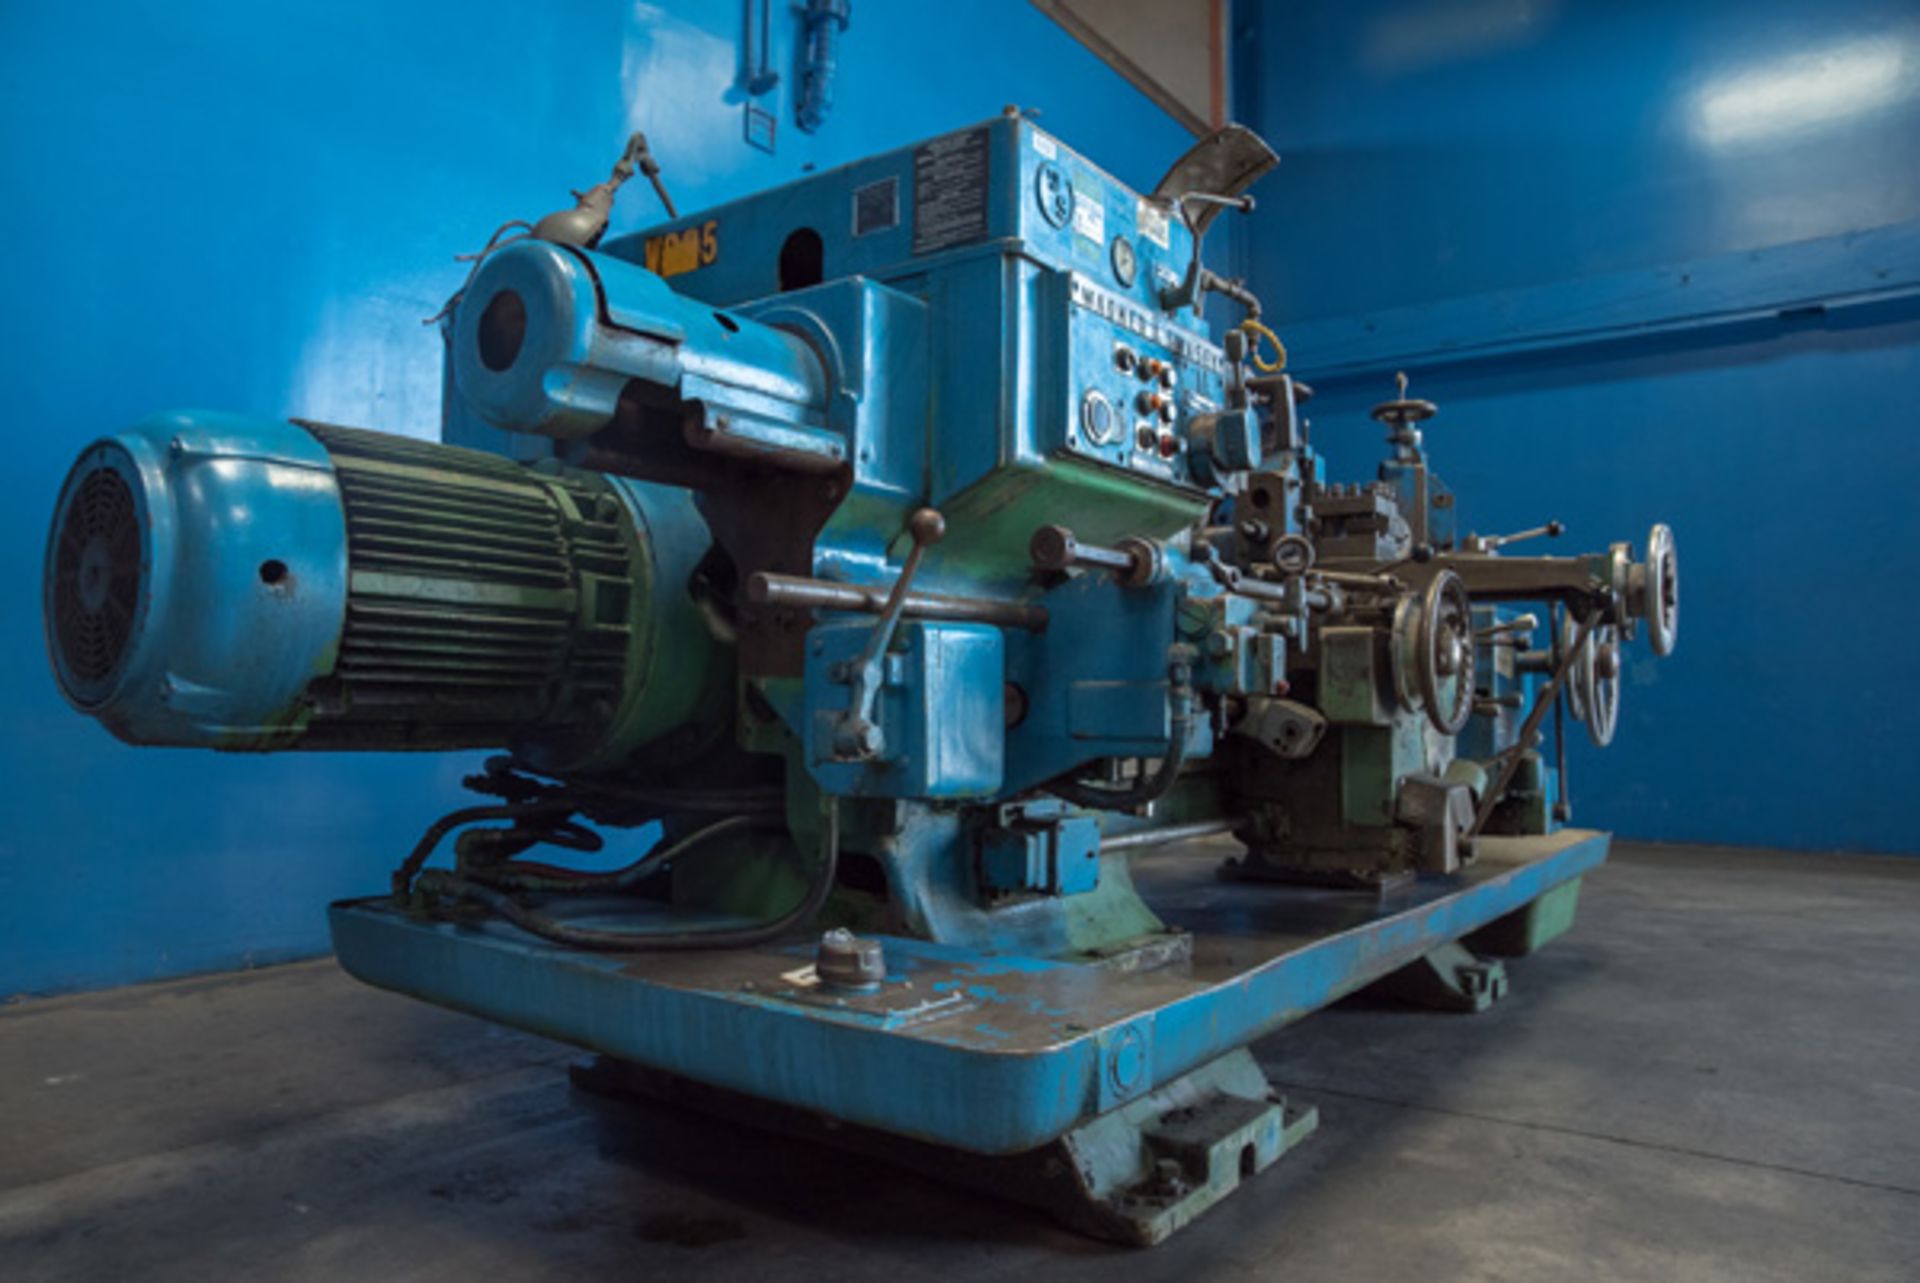 Warner & Swasey Turret Lathe | 18" x 32", Located In: Huntington Park, CA - 4552 - Image 11 of 14